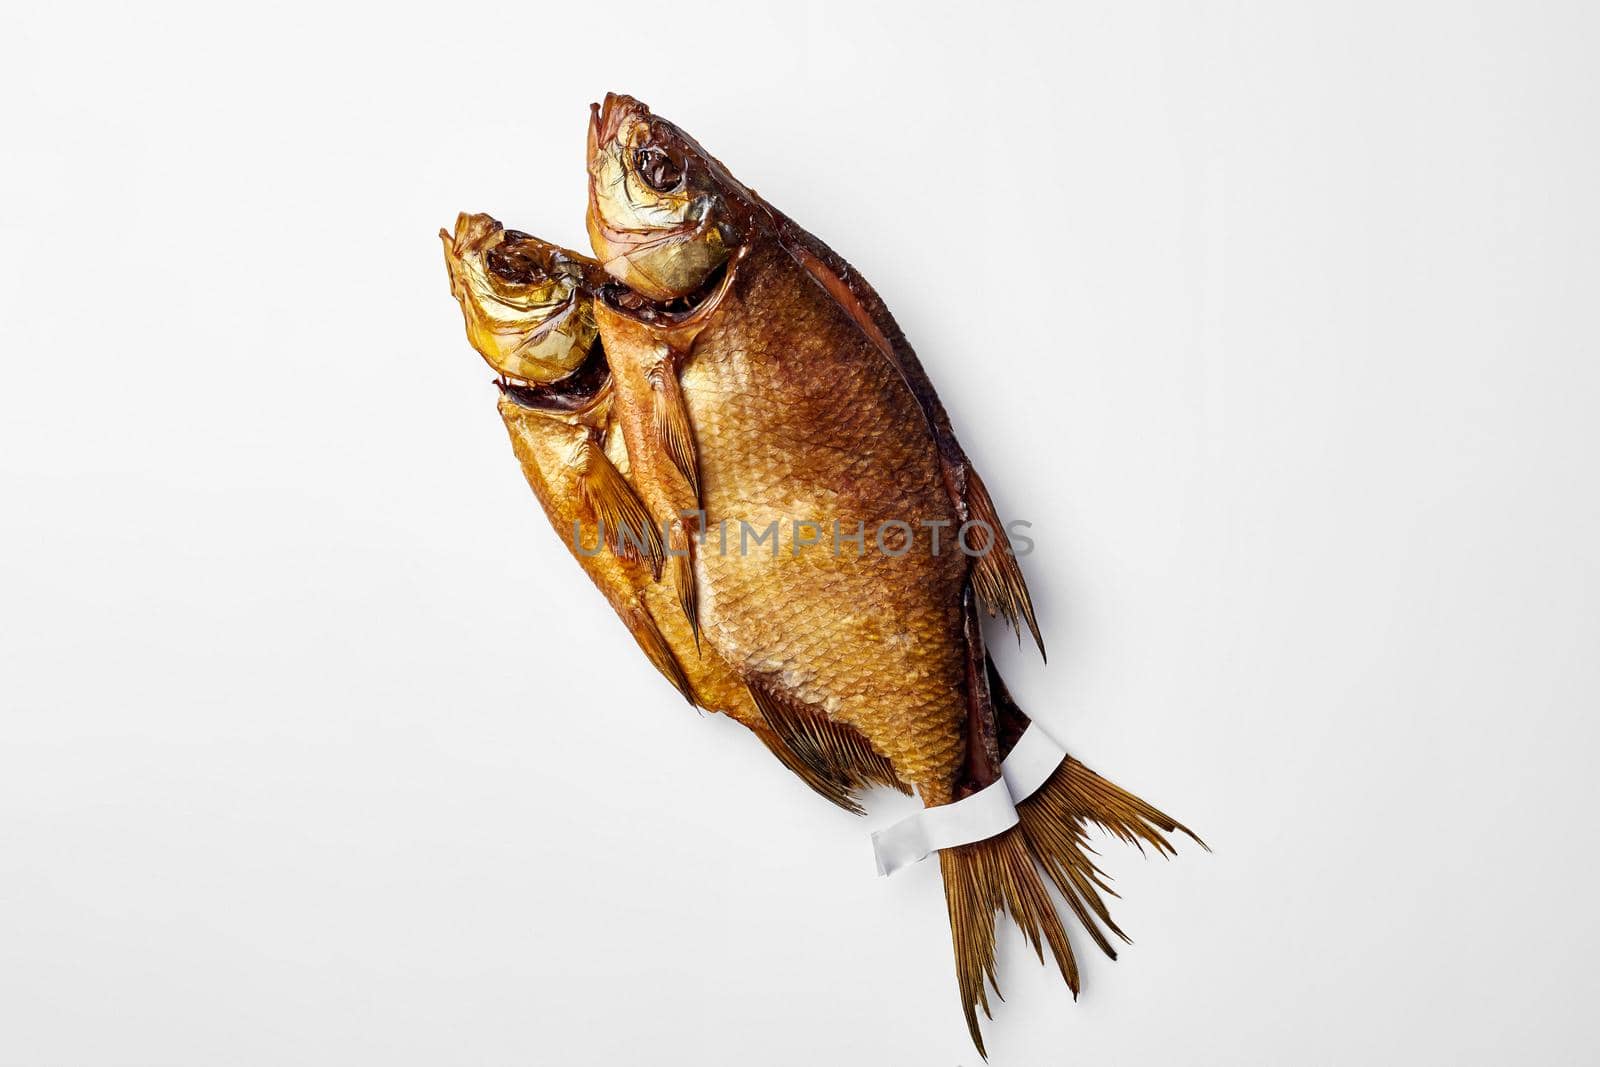 Bunch of two cold smoked breams lying on white surface, top view with copyspace. Paper labels on fish tails for your logo